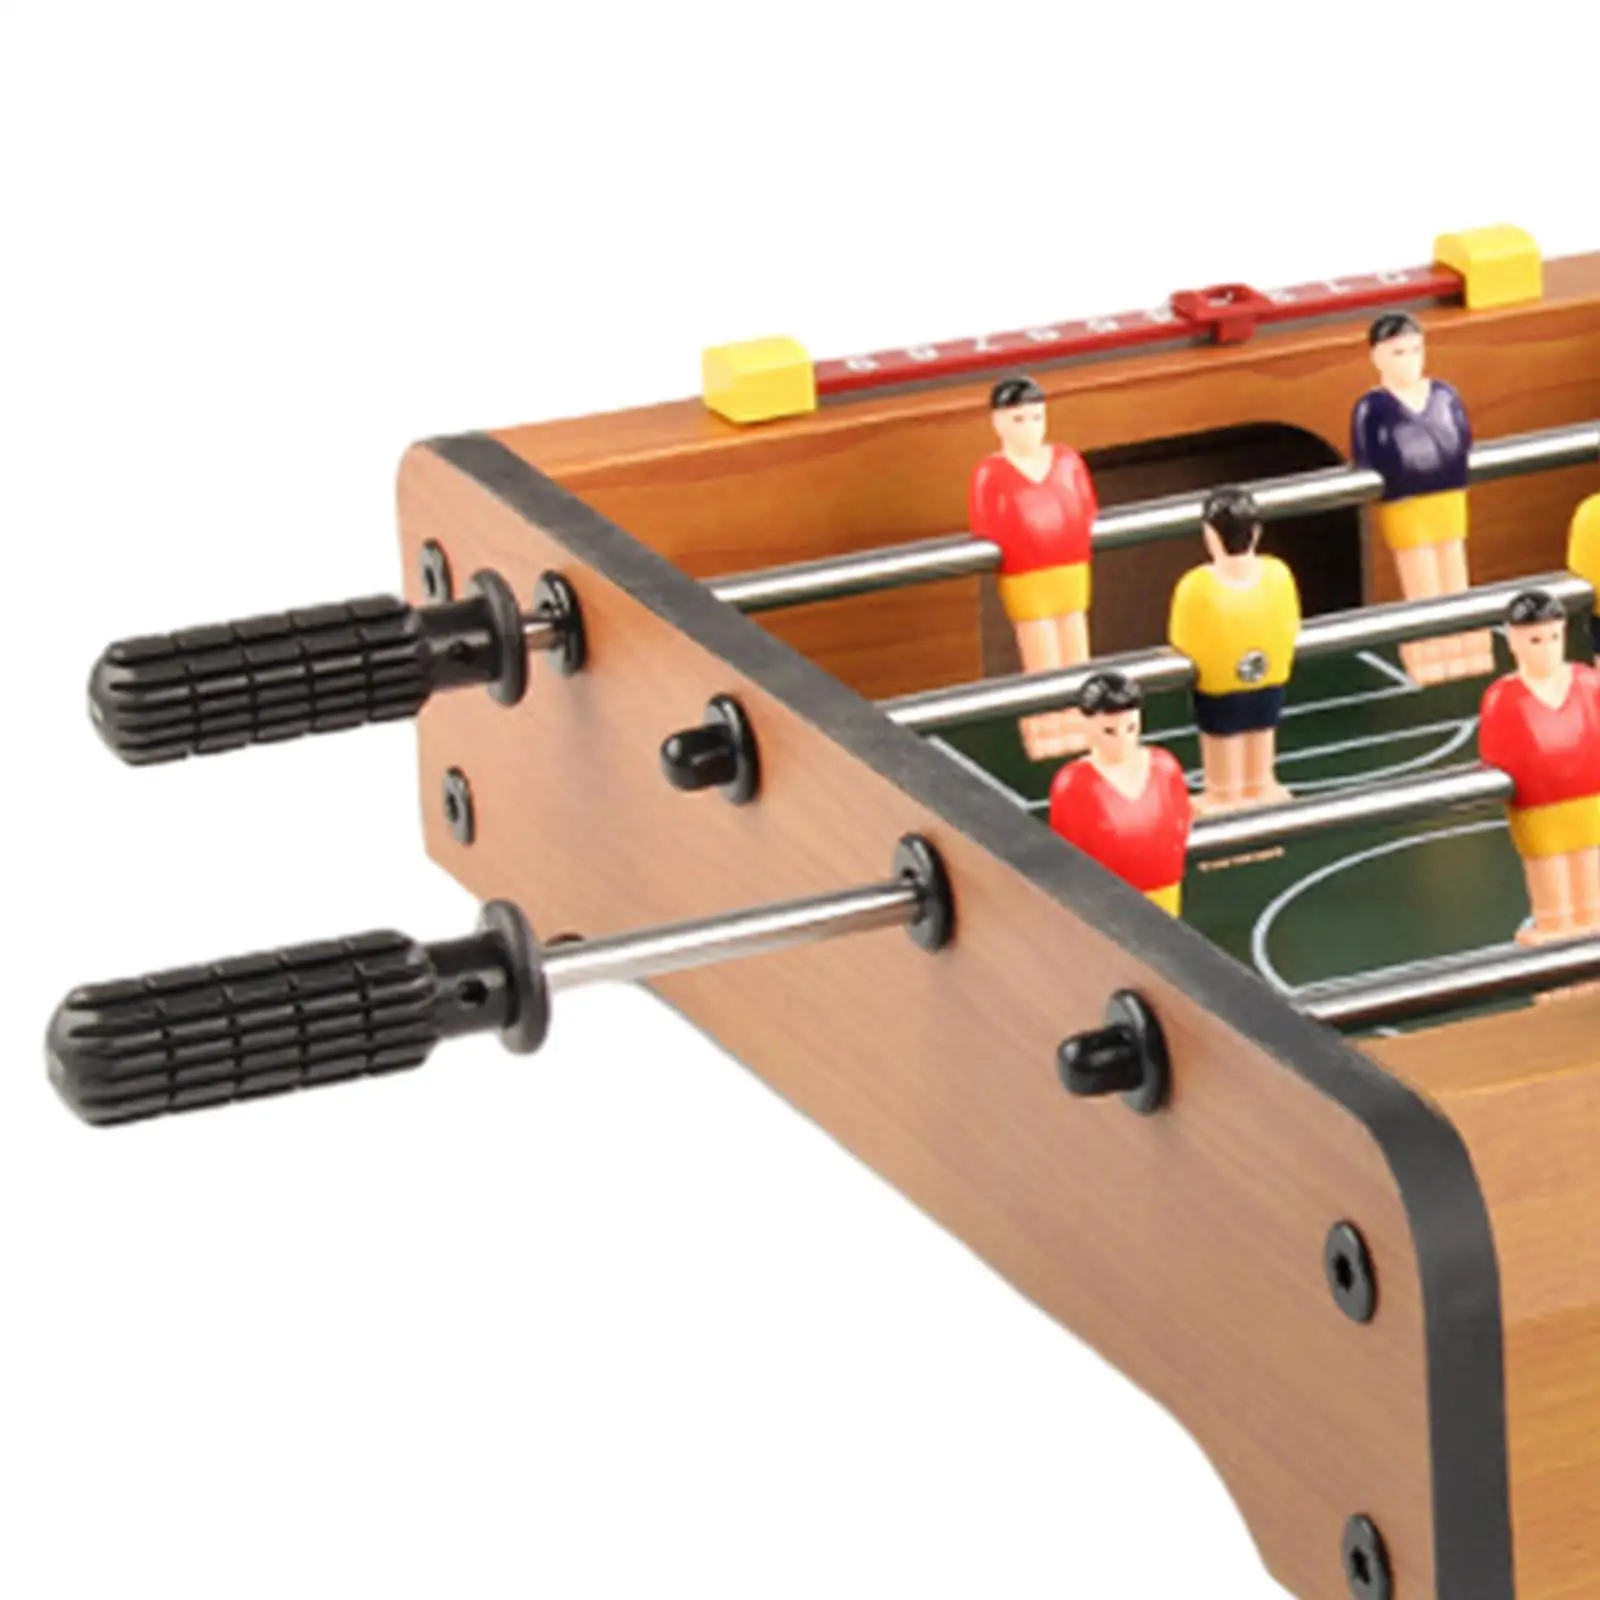 Table Top Foosball Table for Adults, Compact Mini Tabletop Soccer Game, Portable Recreational Hand Soccer for Game Room